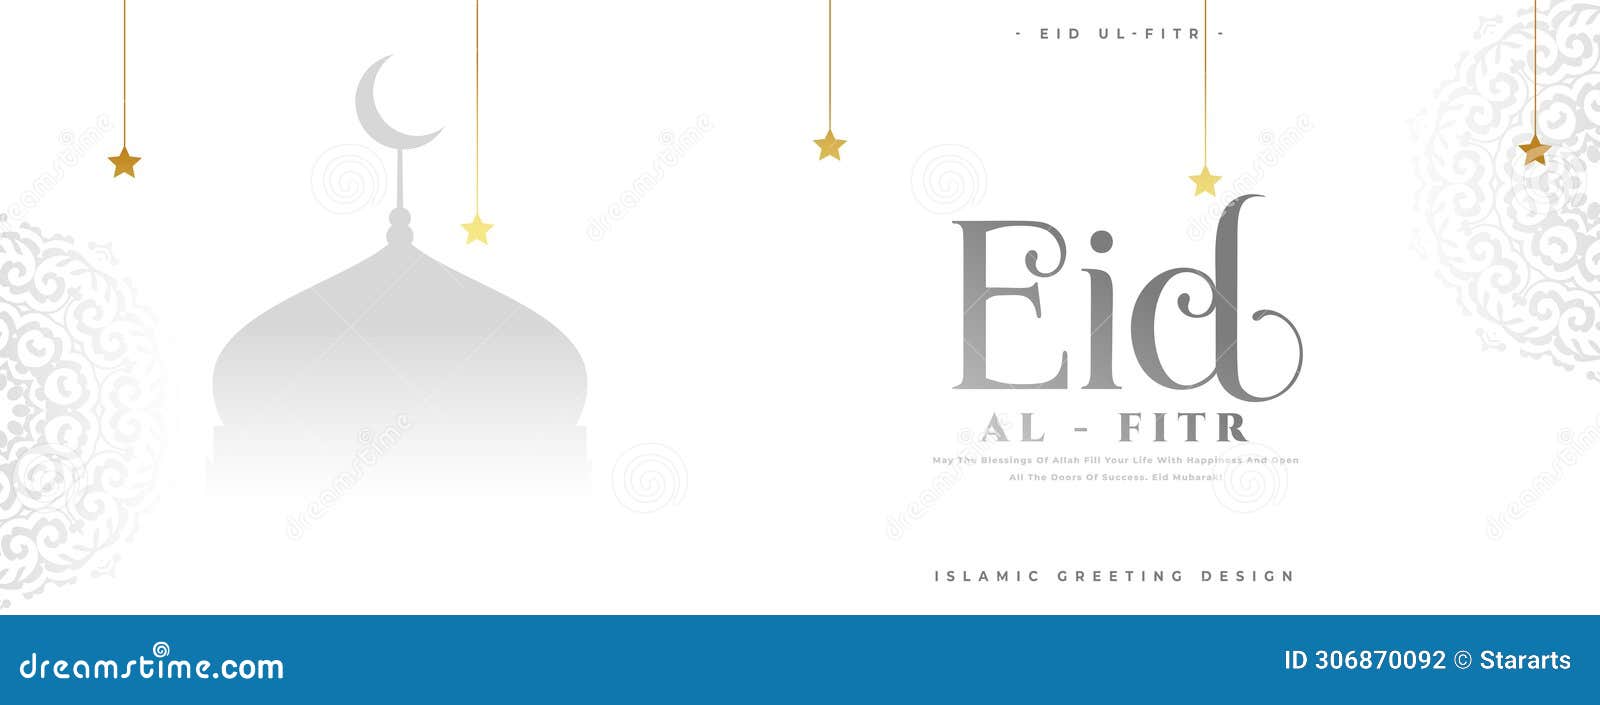 traditional eid ul fitr wishes wallpaper with mosque 